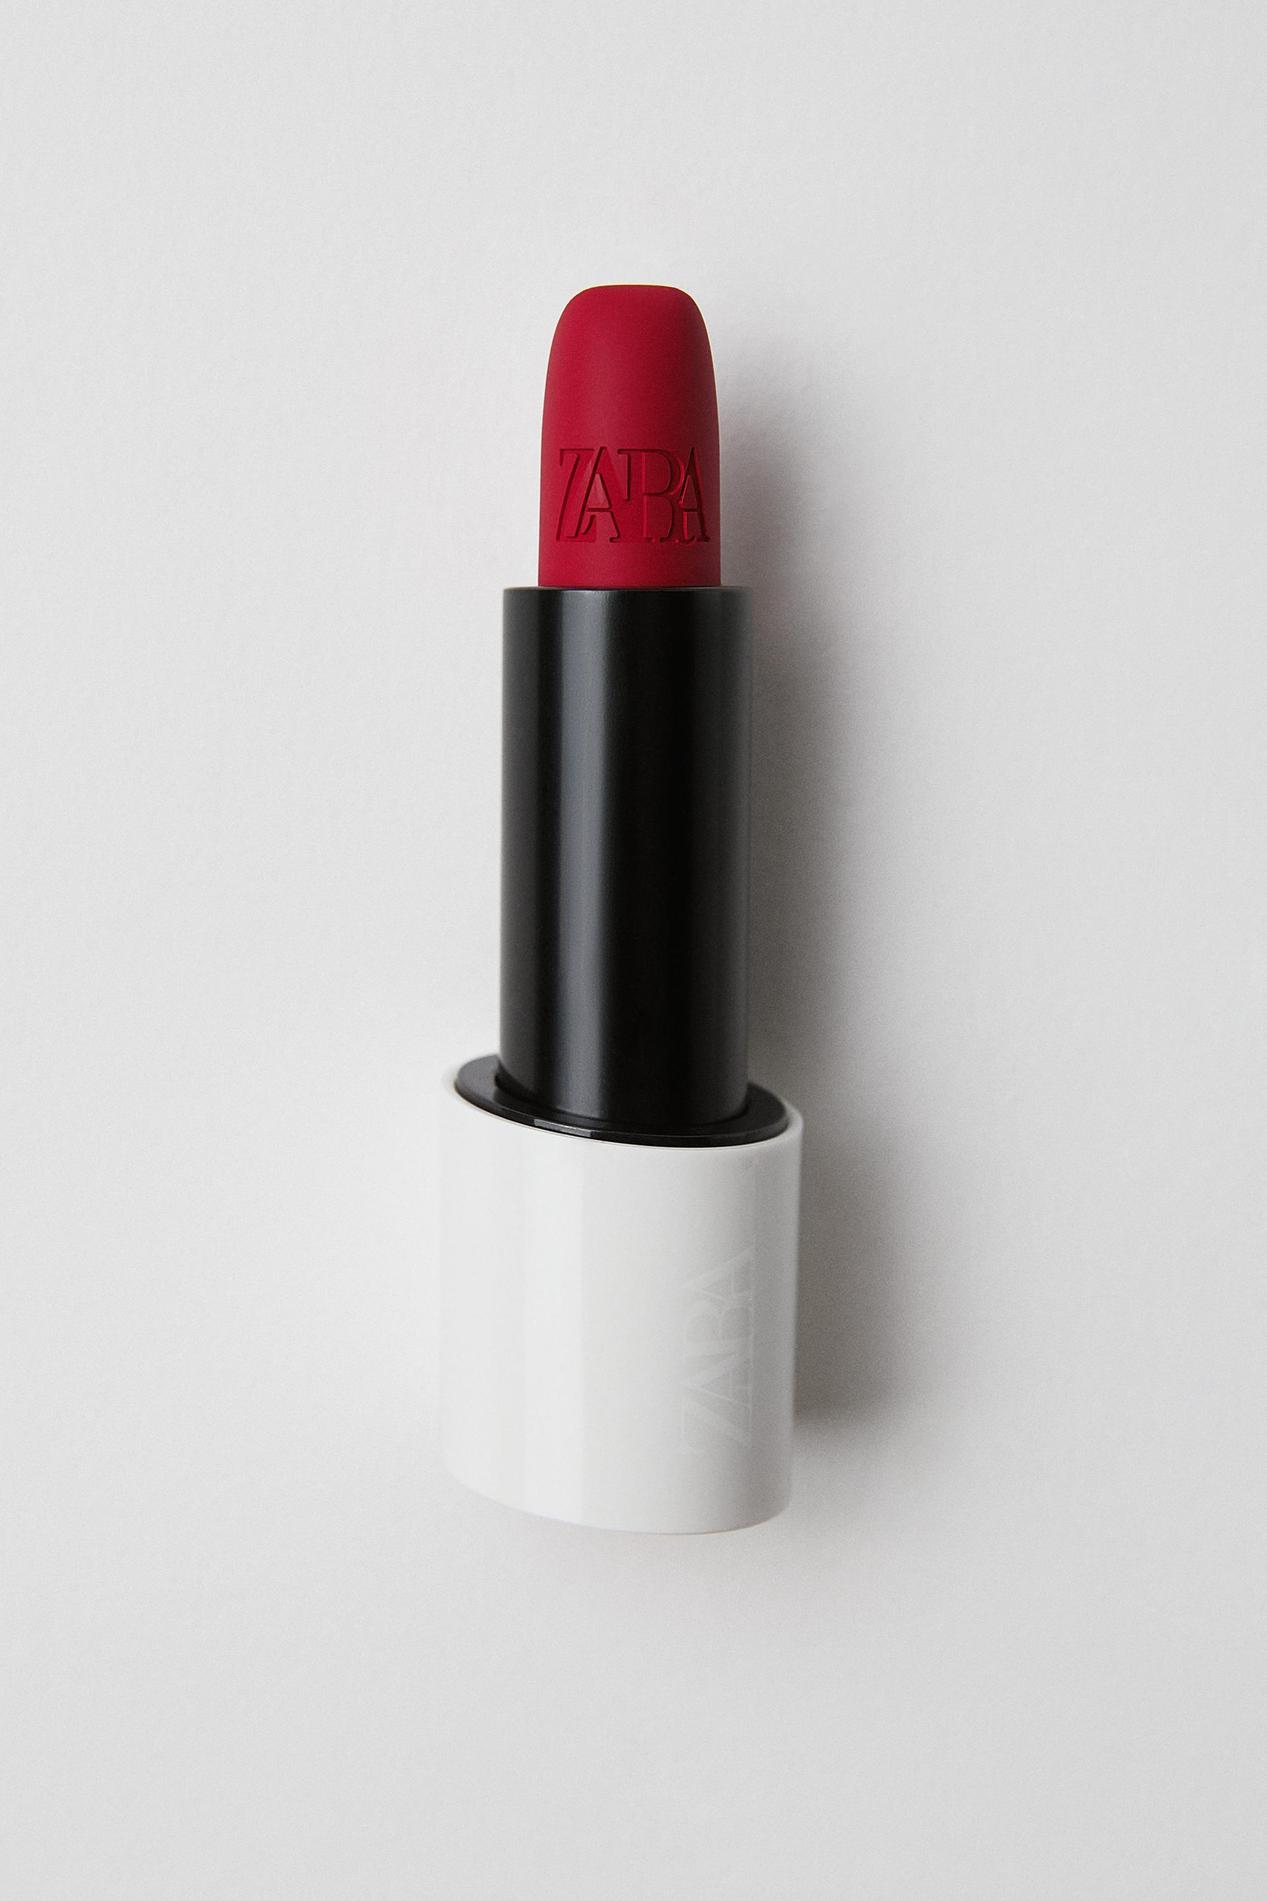 LIPSTICK CULT DRAMA offers at 79 Dhs in Zara